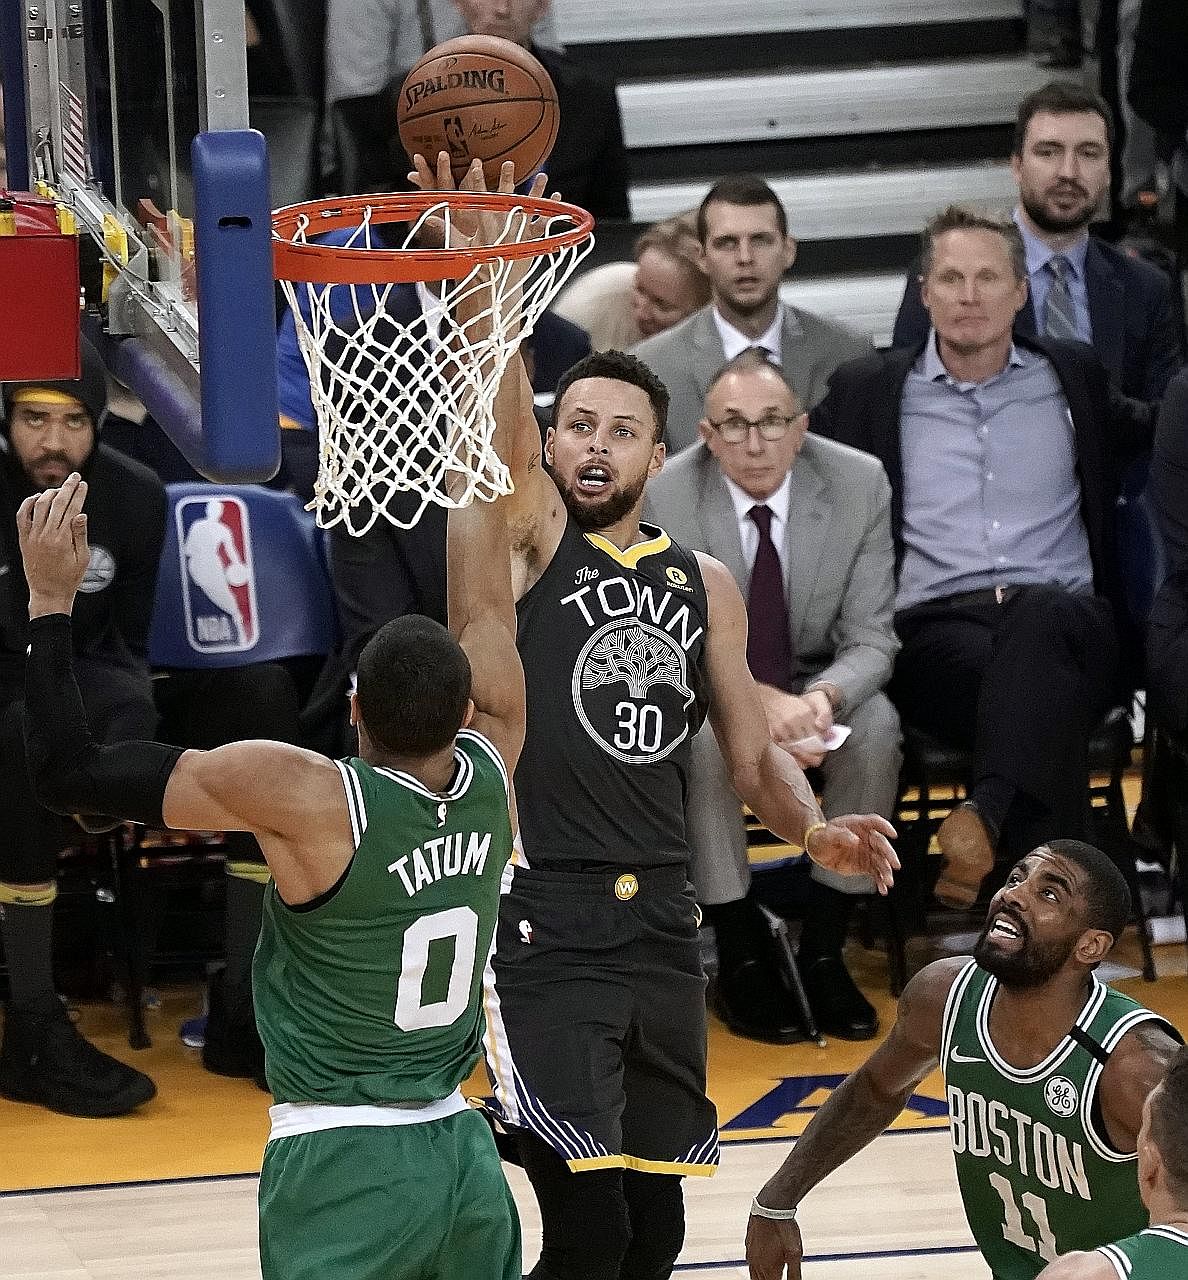 Golden State guard Stephen Curry shoots over Boston forward Jayson Tatum as guard Kyrie Irving looks on during their NBA game at Oracle Arena on Saturday. Curry says he and Irving bring the best out of each other.